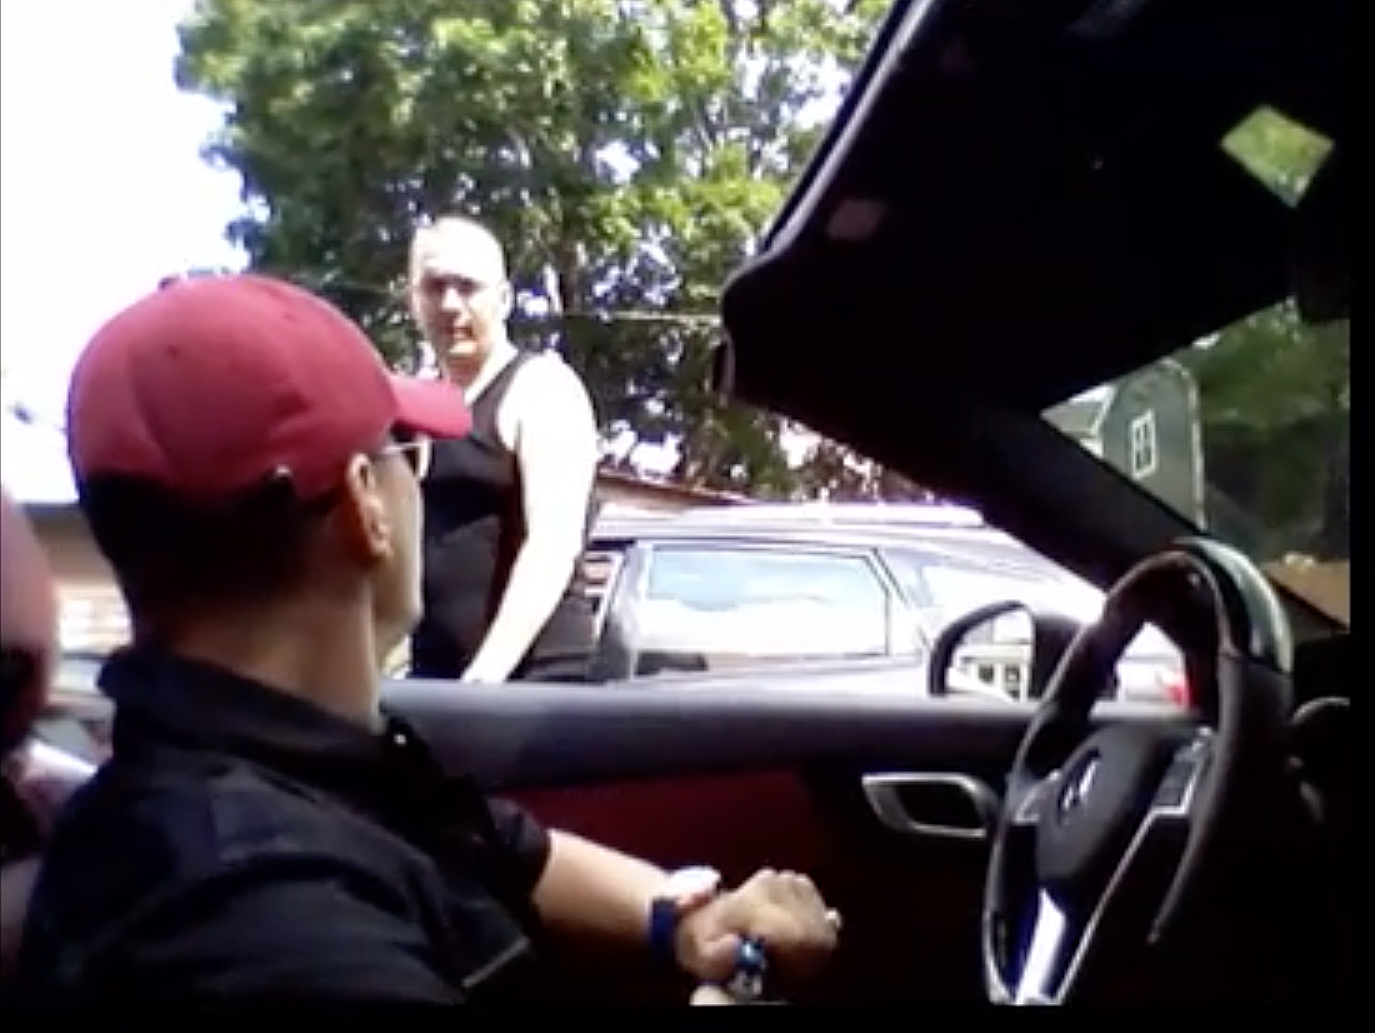 Earl Casteel (standing) was seen in the viral cellphone video from which this image is taken being shot in both legs in 2015 in Irving Park by Thaddeus “T.J.” Jimenez (seated in the car).